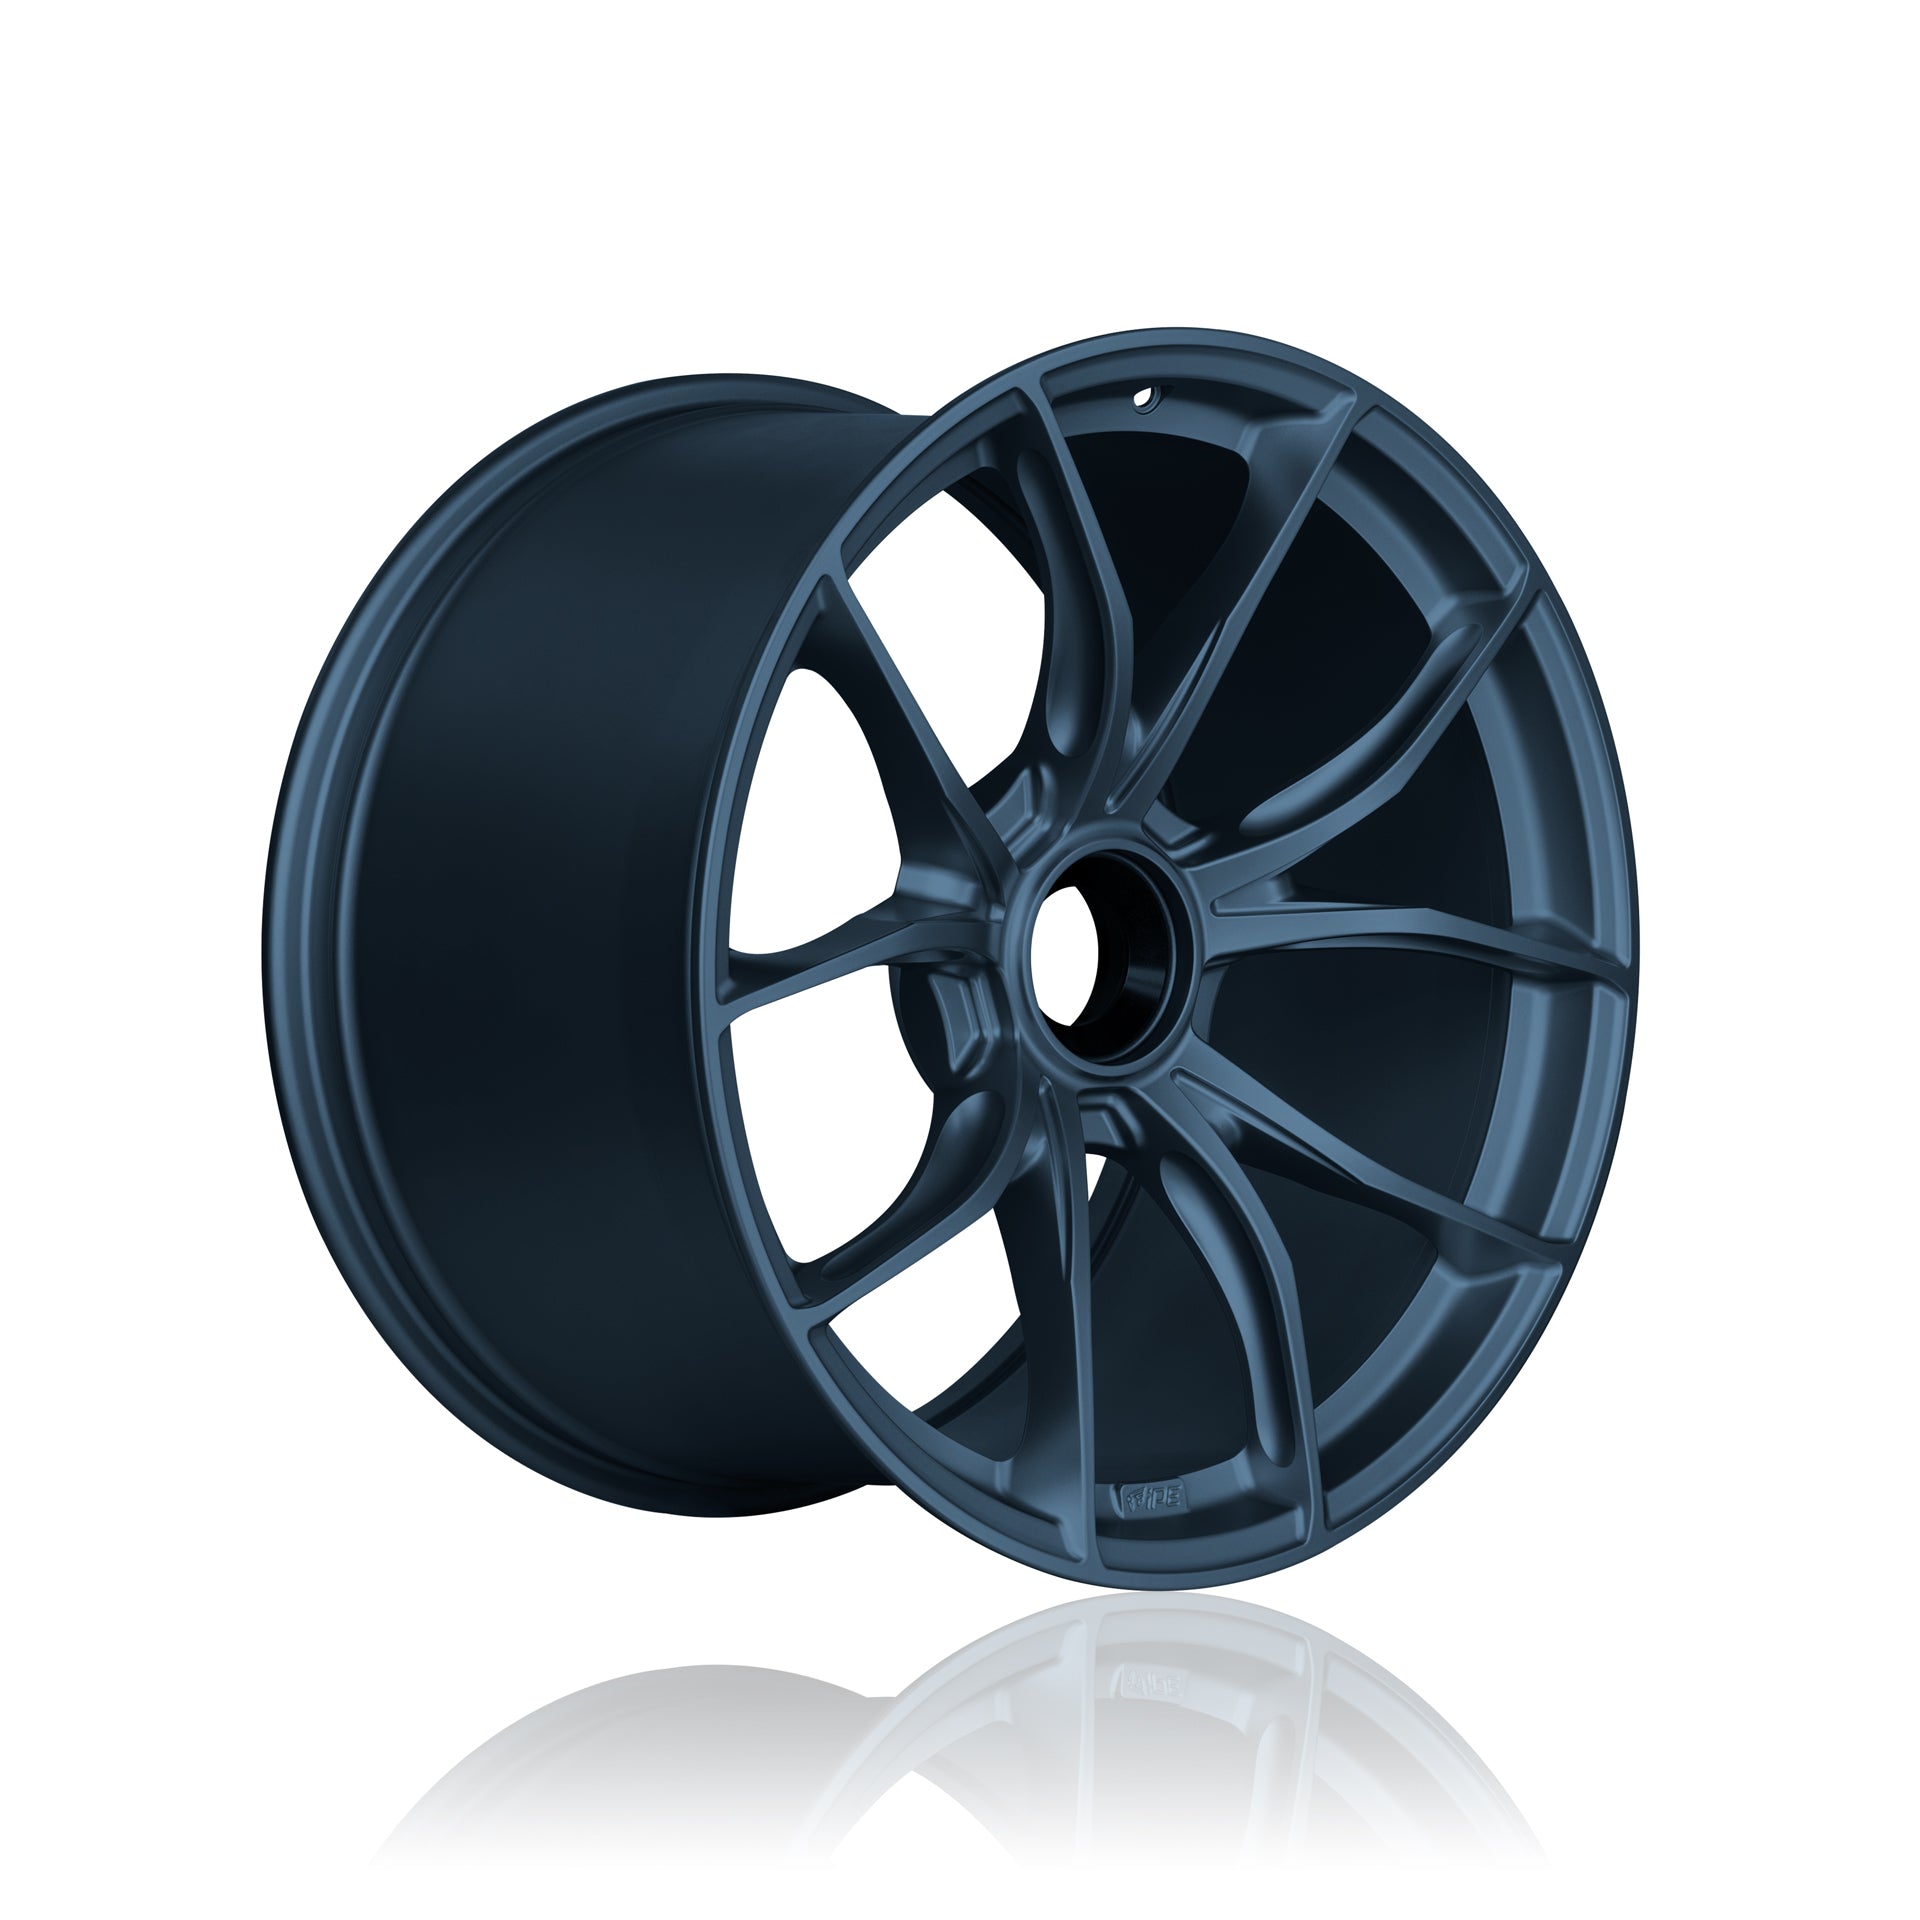 Offset front view of a blue IPE MFR-01 Magnesium wheel on a white background